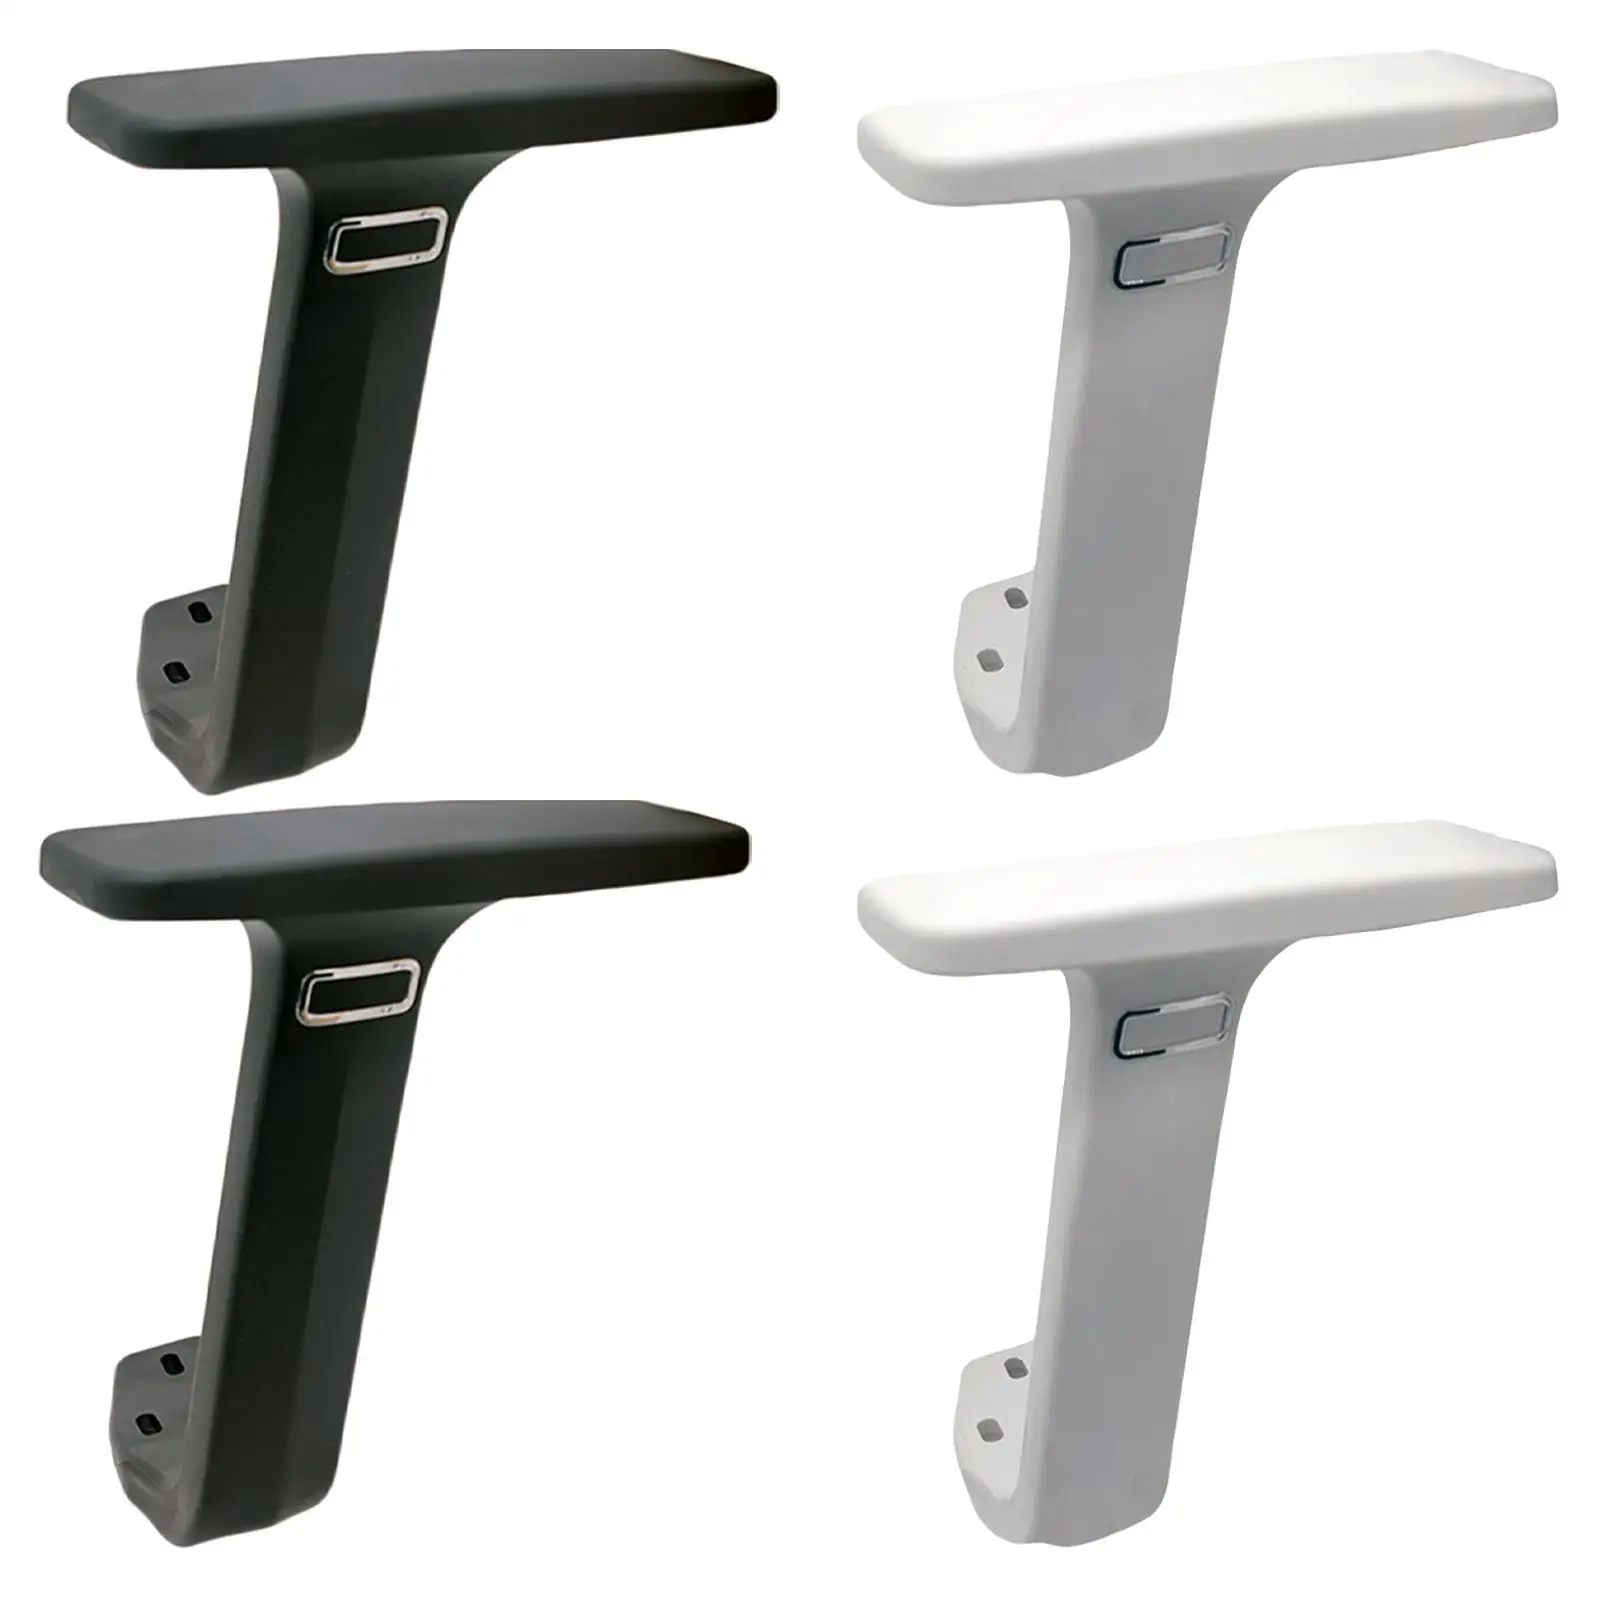 https://ae01.alicdn.com/kf/Sd028a67e21f347089bf85a8717535e7cb/2Pcs-Office-Chair-Armrest-Chair-Armrest-Easy-to-Install-Handrail-Furniture-Accessories-Gaming-Chair-Arms-for.jpg